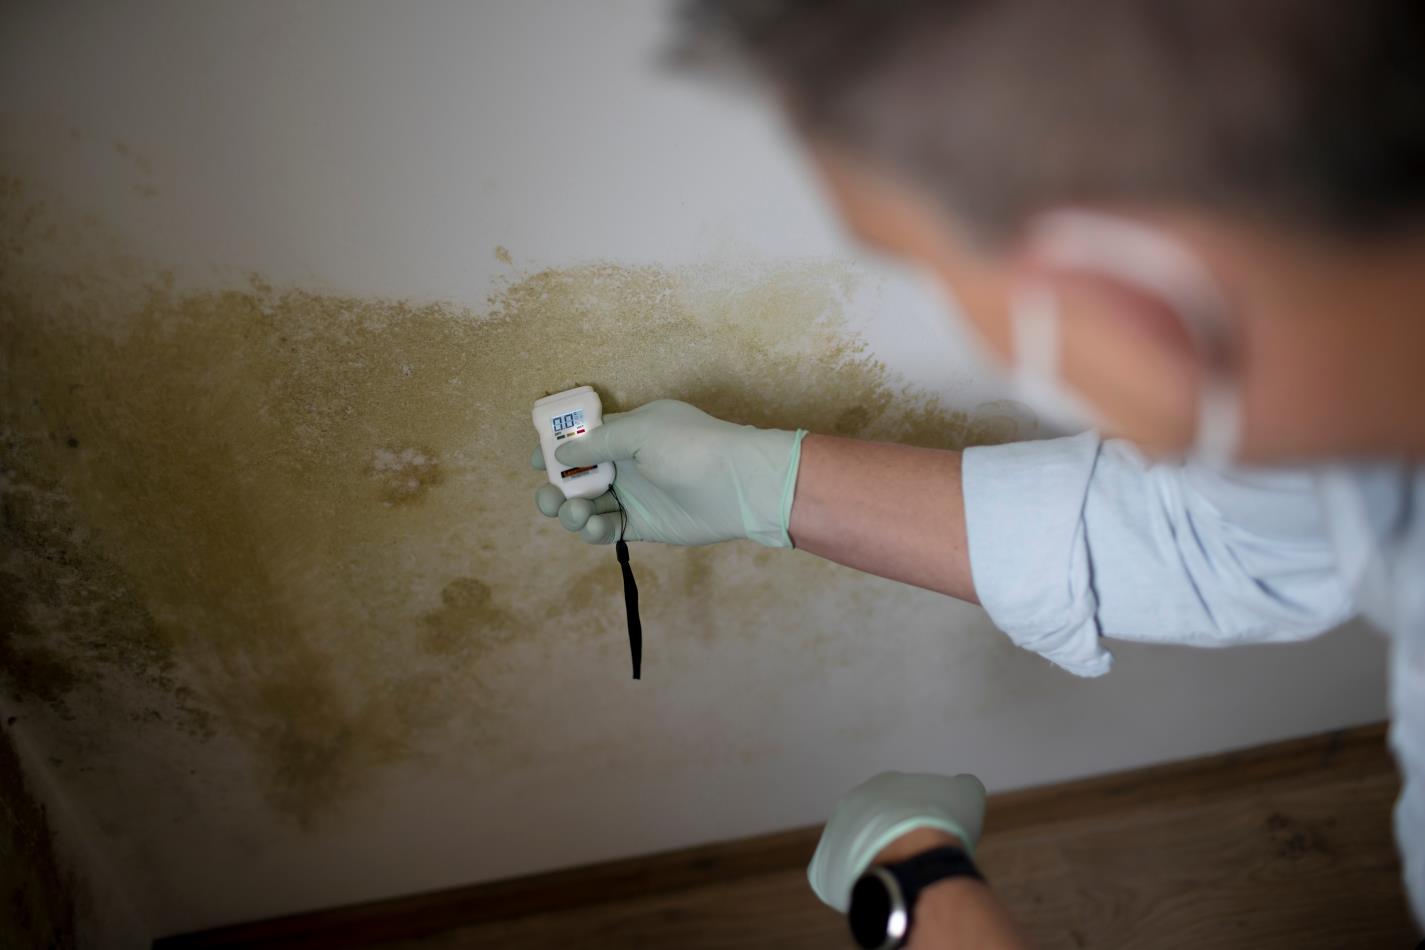 A man looking at some water damage on a houses drywall